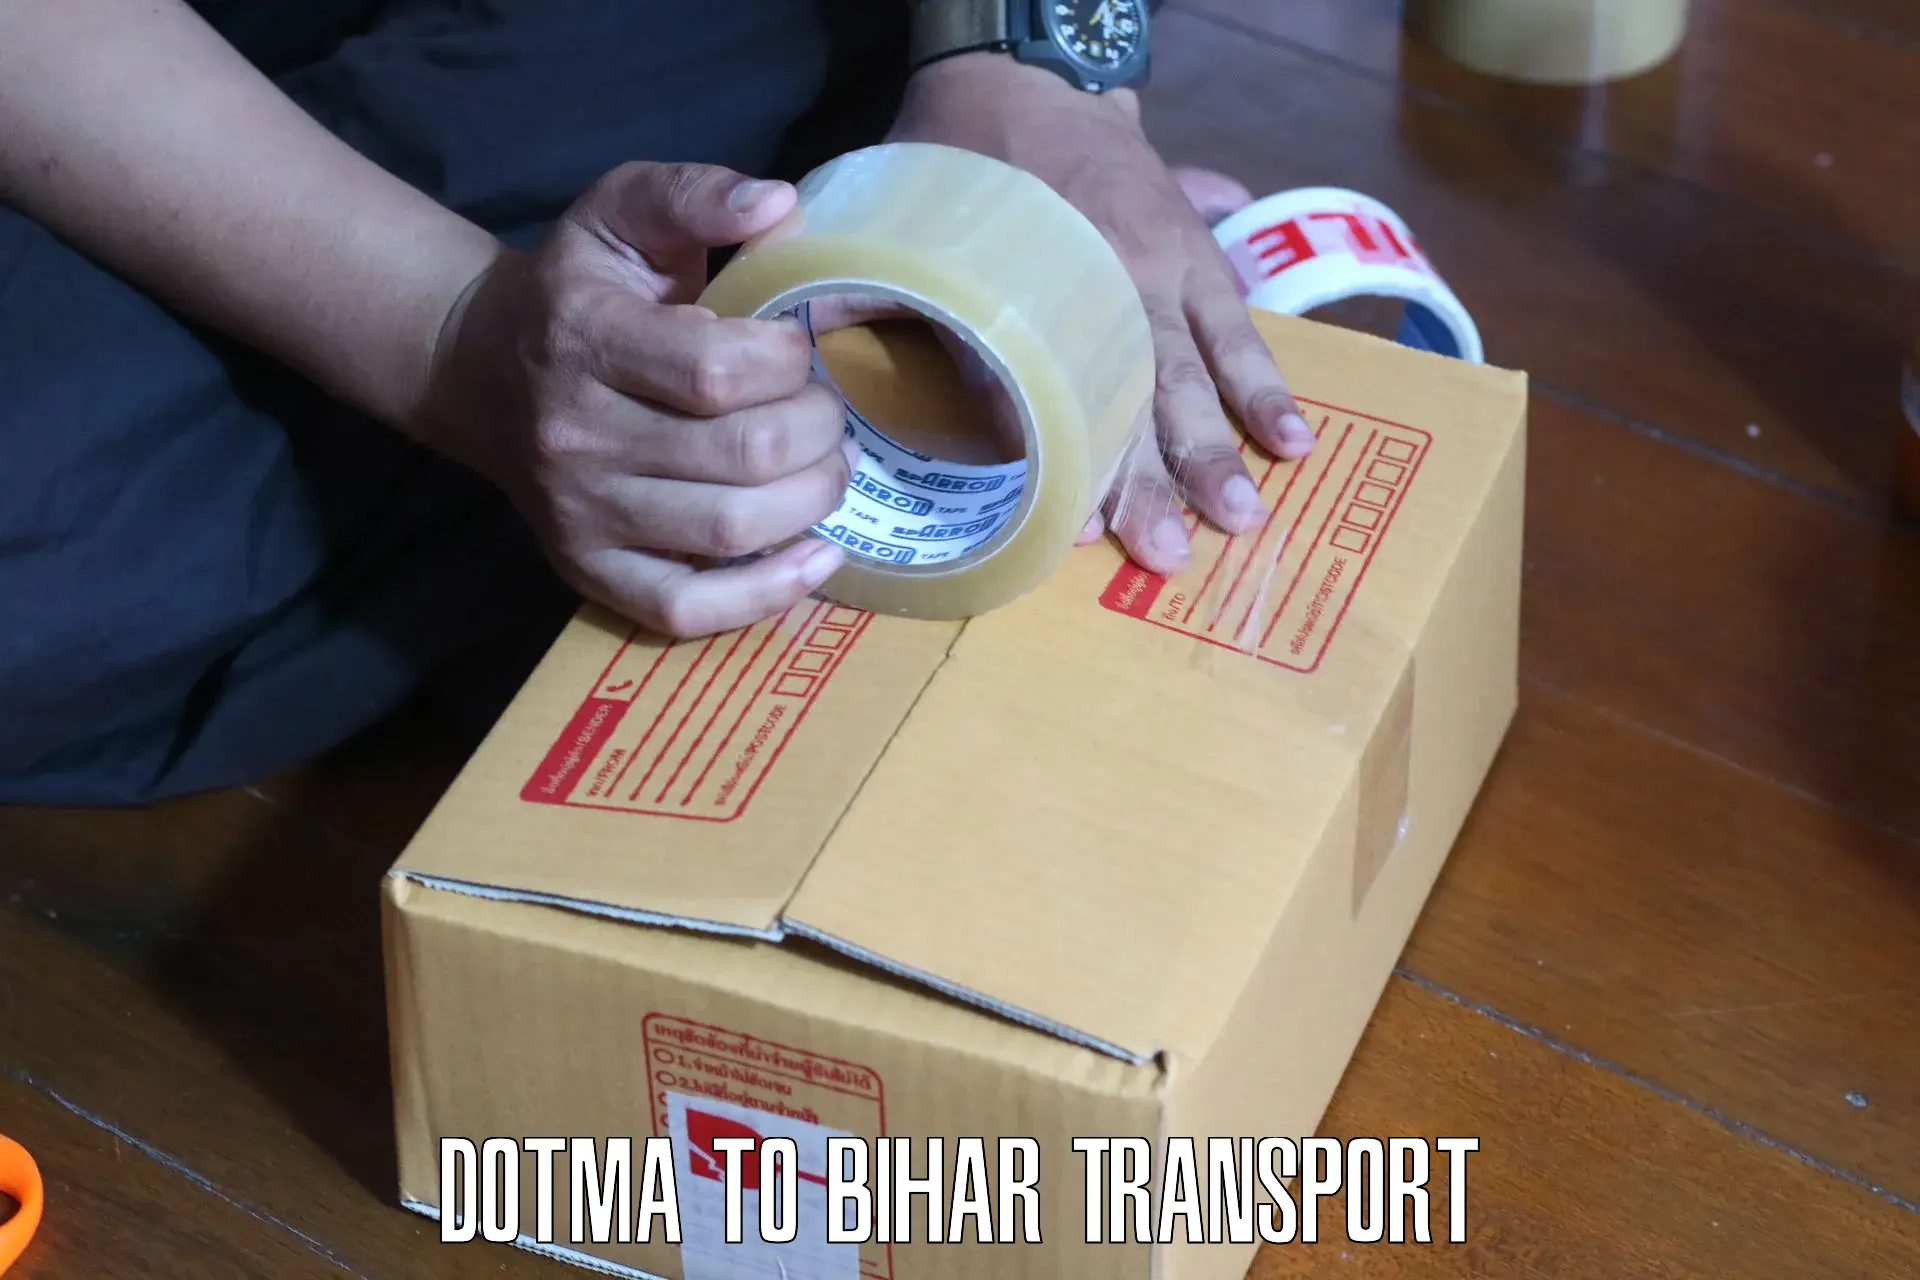 Luggage transport services Dotma to Fatwah